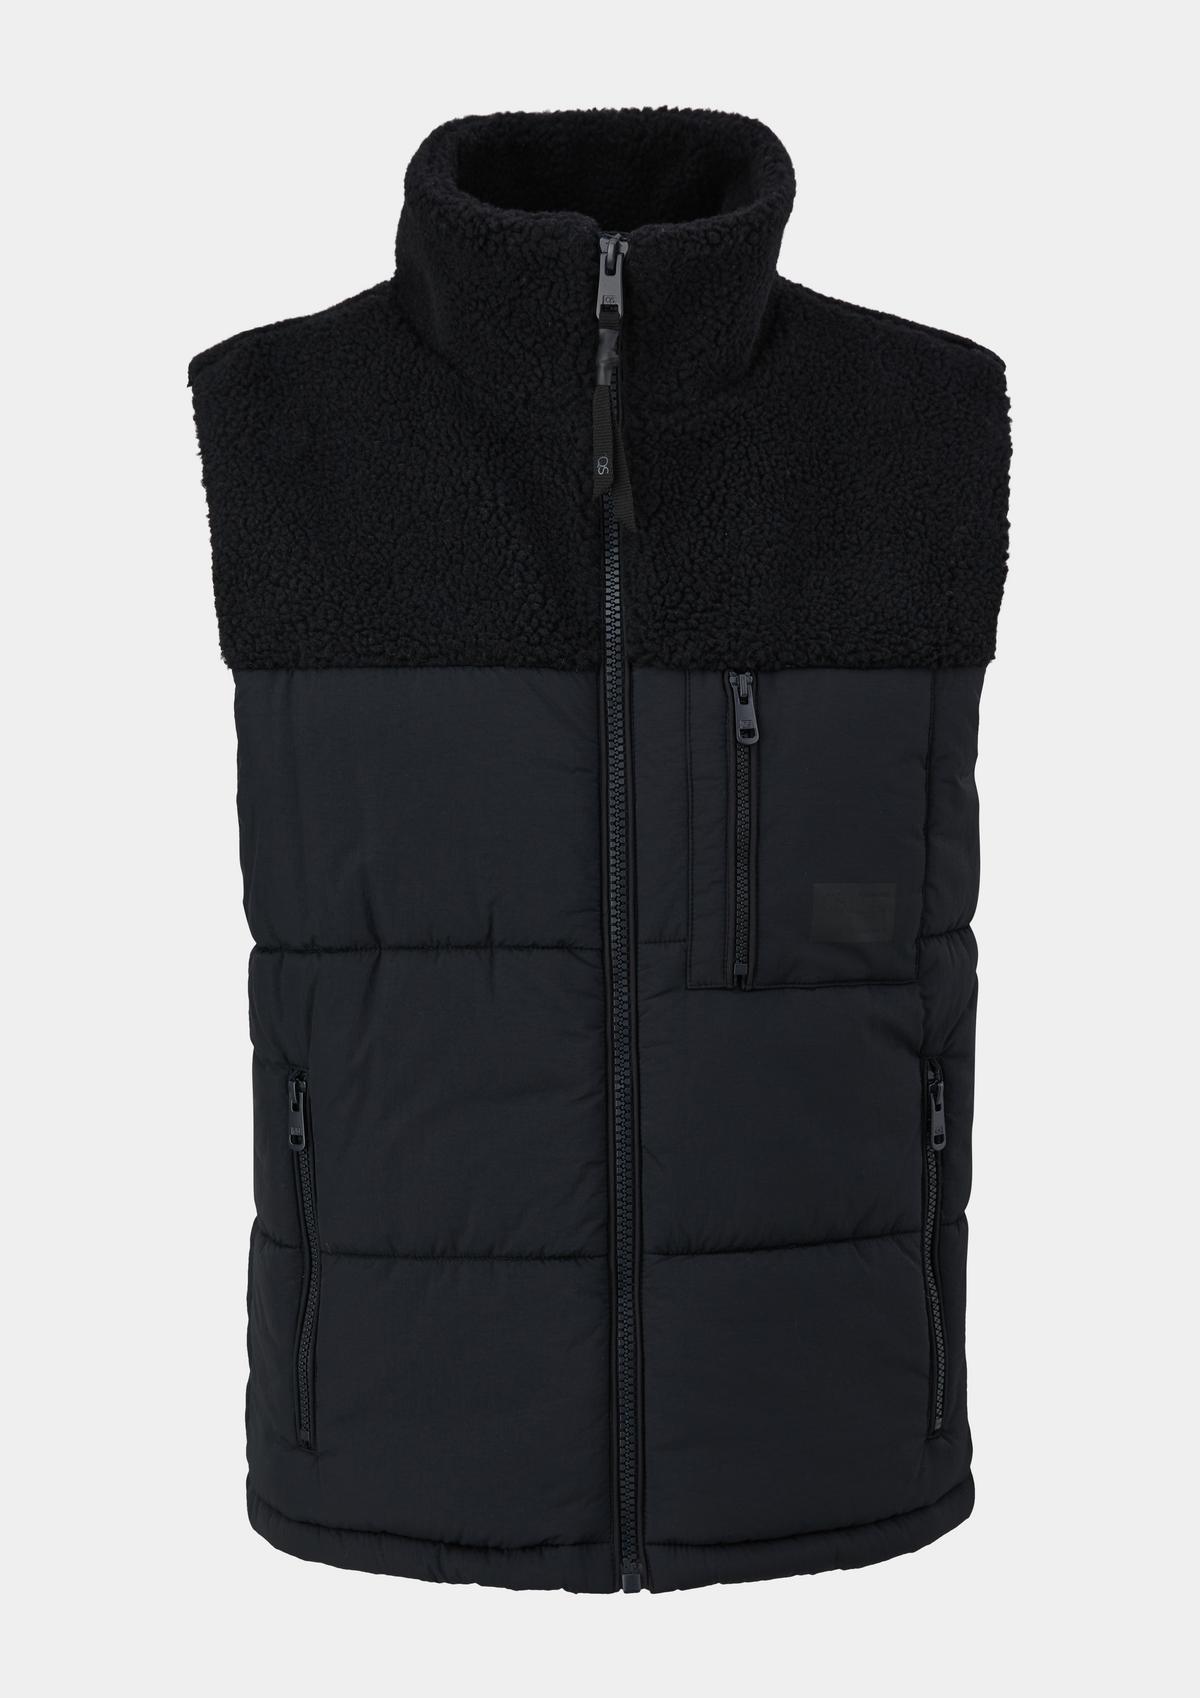 s.Oliver Body warmer with teddy plush